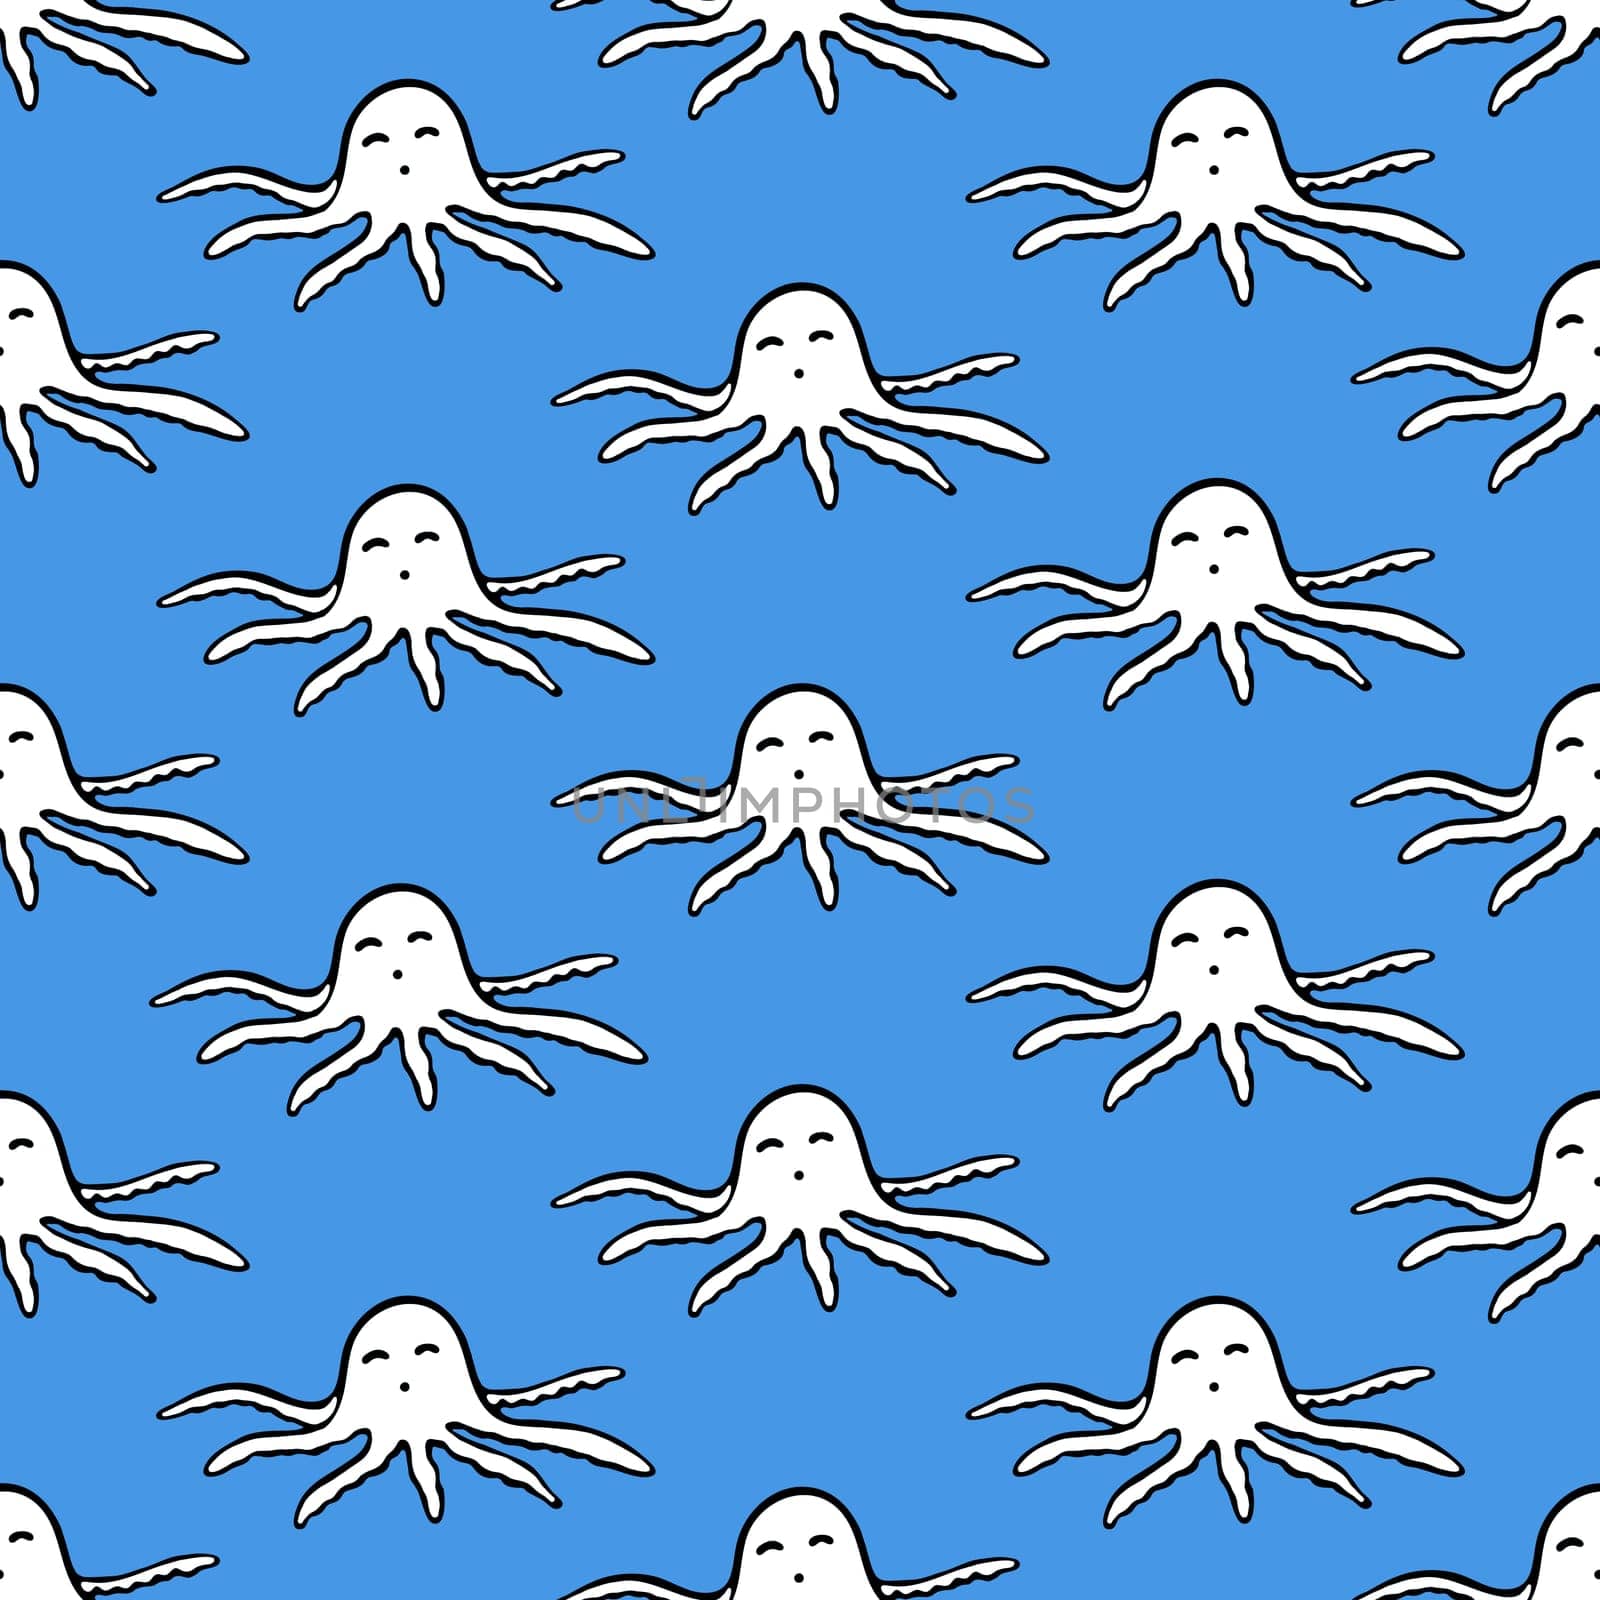 Octopus Seamless Pattern. Background with Hand Drawn Doodle Cute Octopus. by Rina_Dozornaya